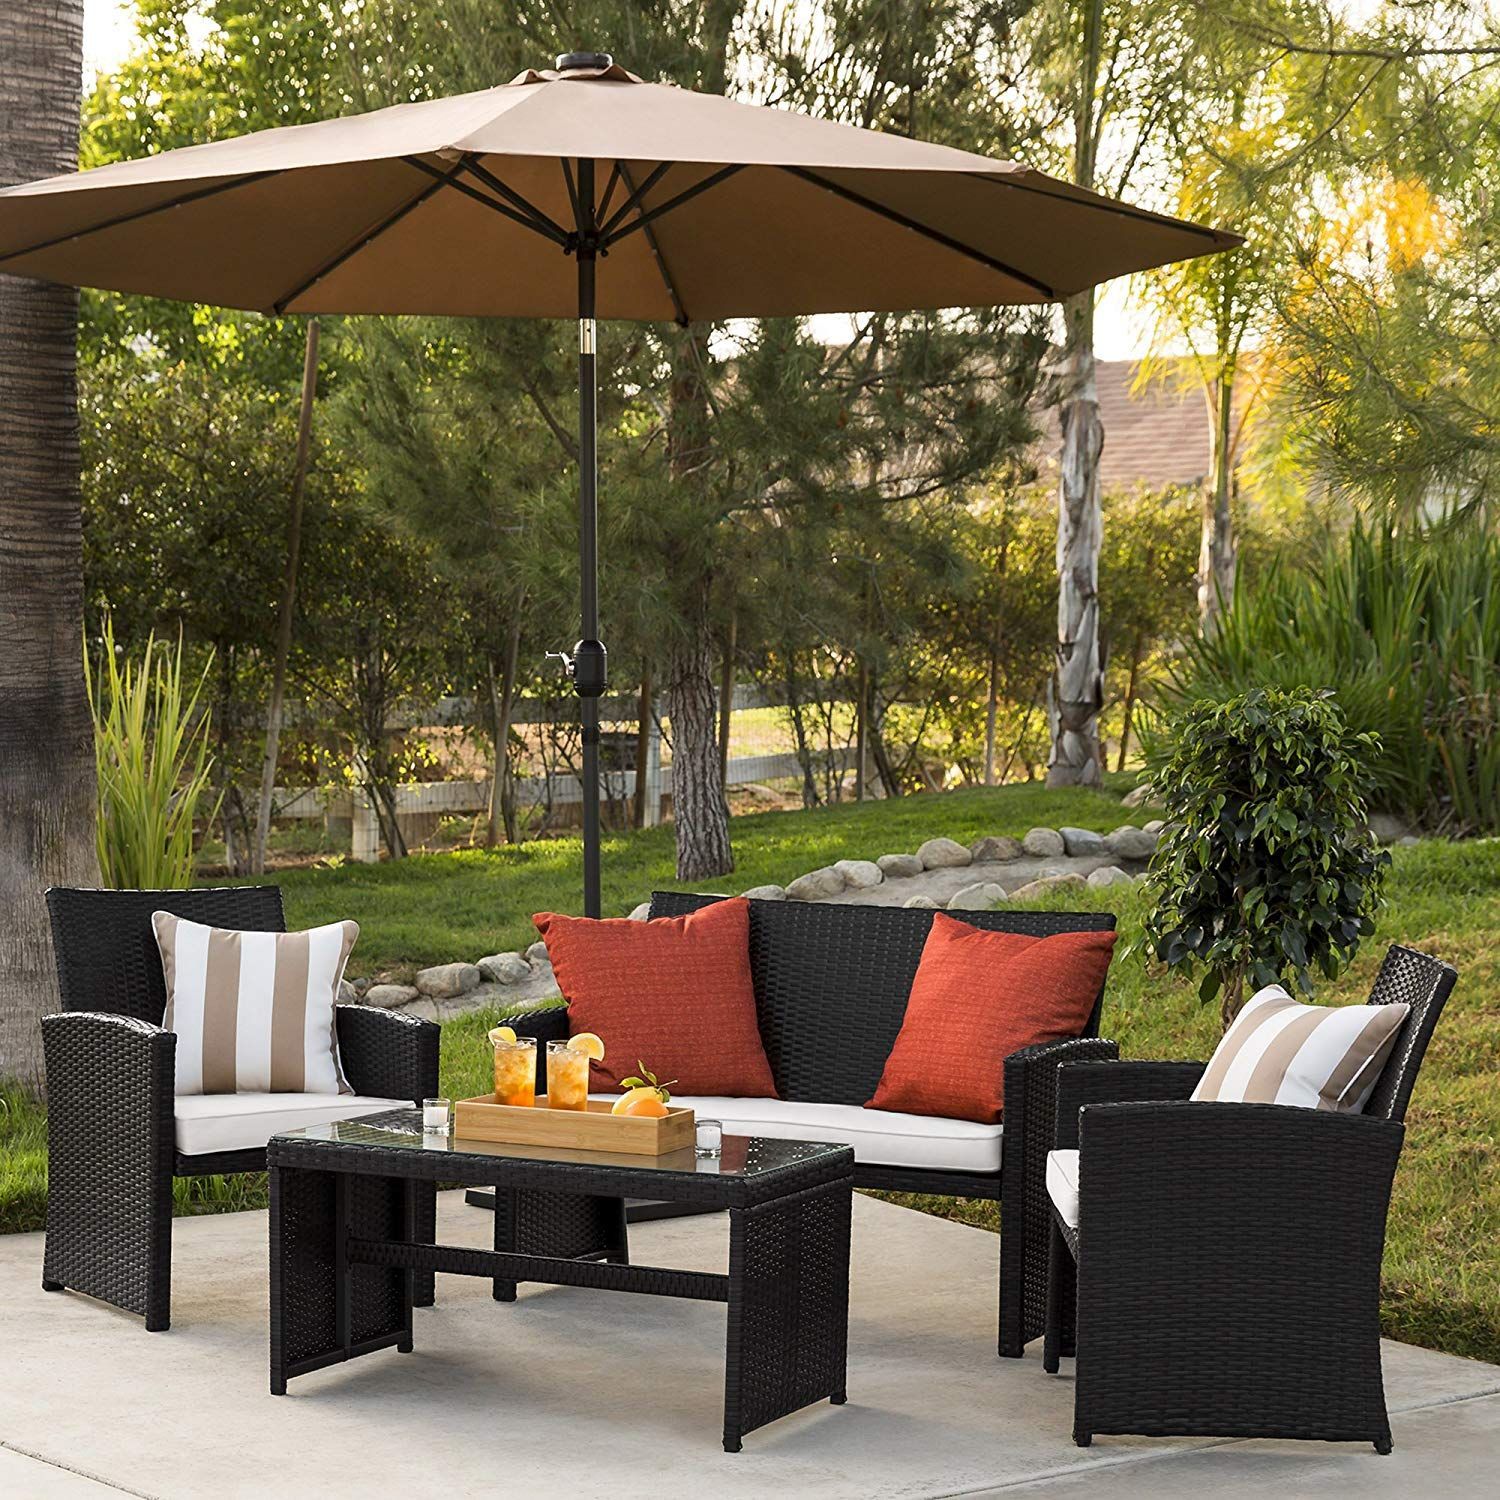 Best Choice Products 4 Piece Wicker Patio Furniture Set W/Tempered Pertaining To 4 Piece Outdoor Wicker Seating Sets (View 15 of 15)